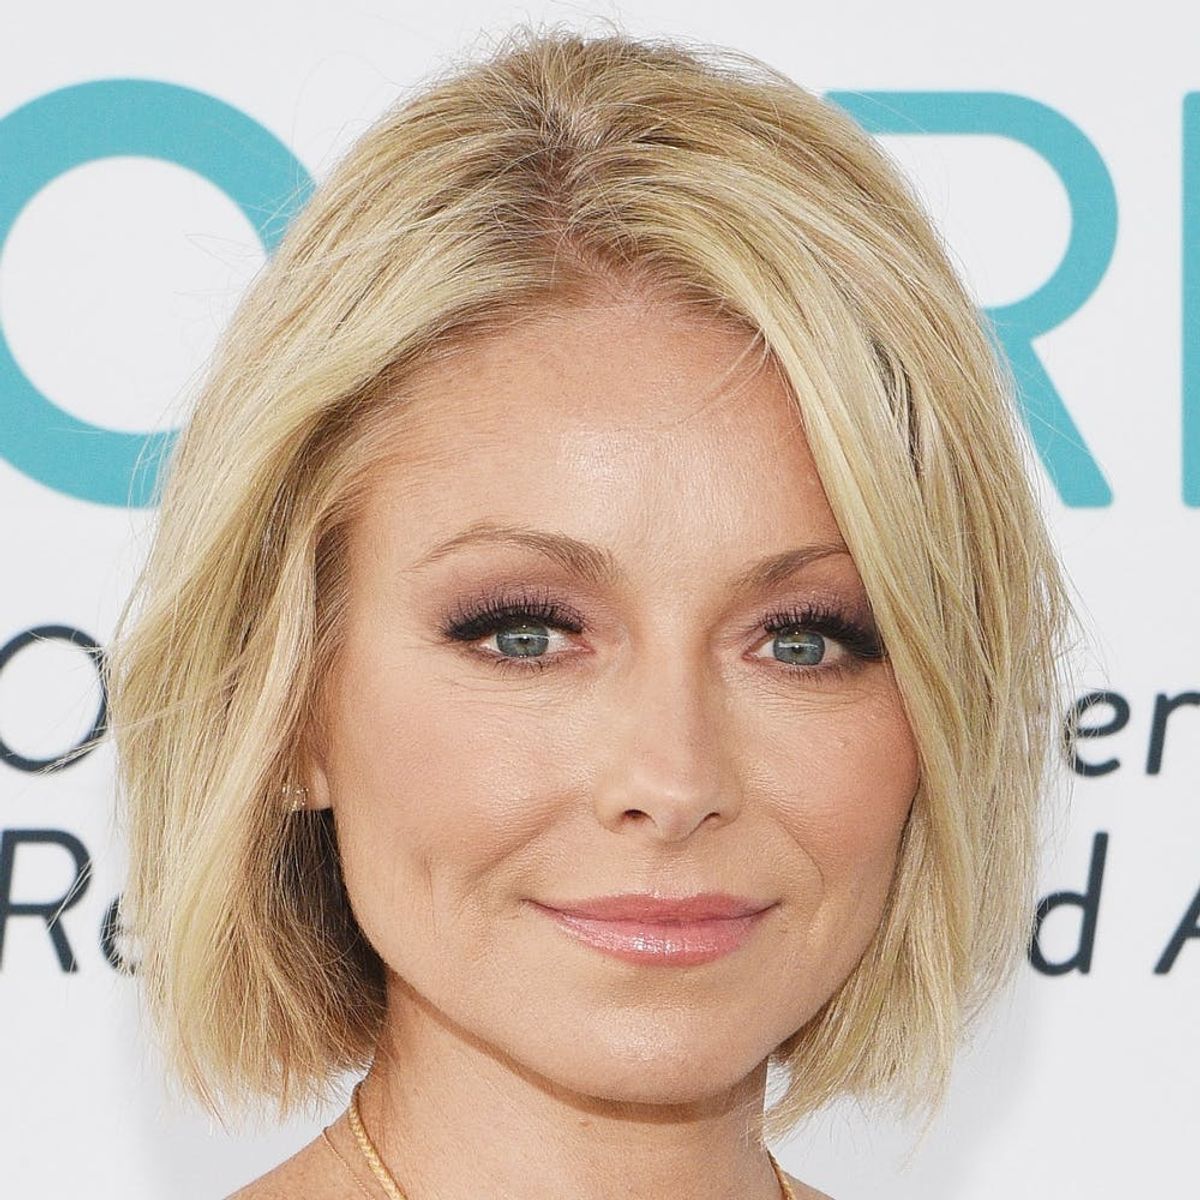 Kelly Ripa Embarrassed Her Daughter With *This* Hilarious Mom Move